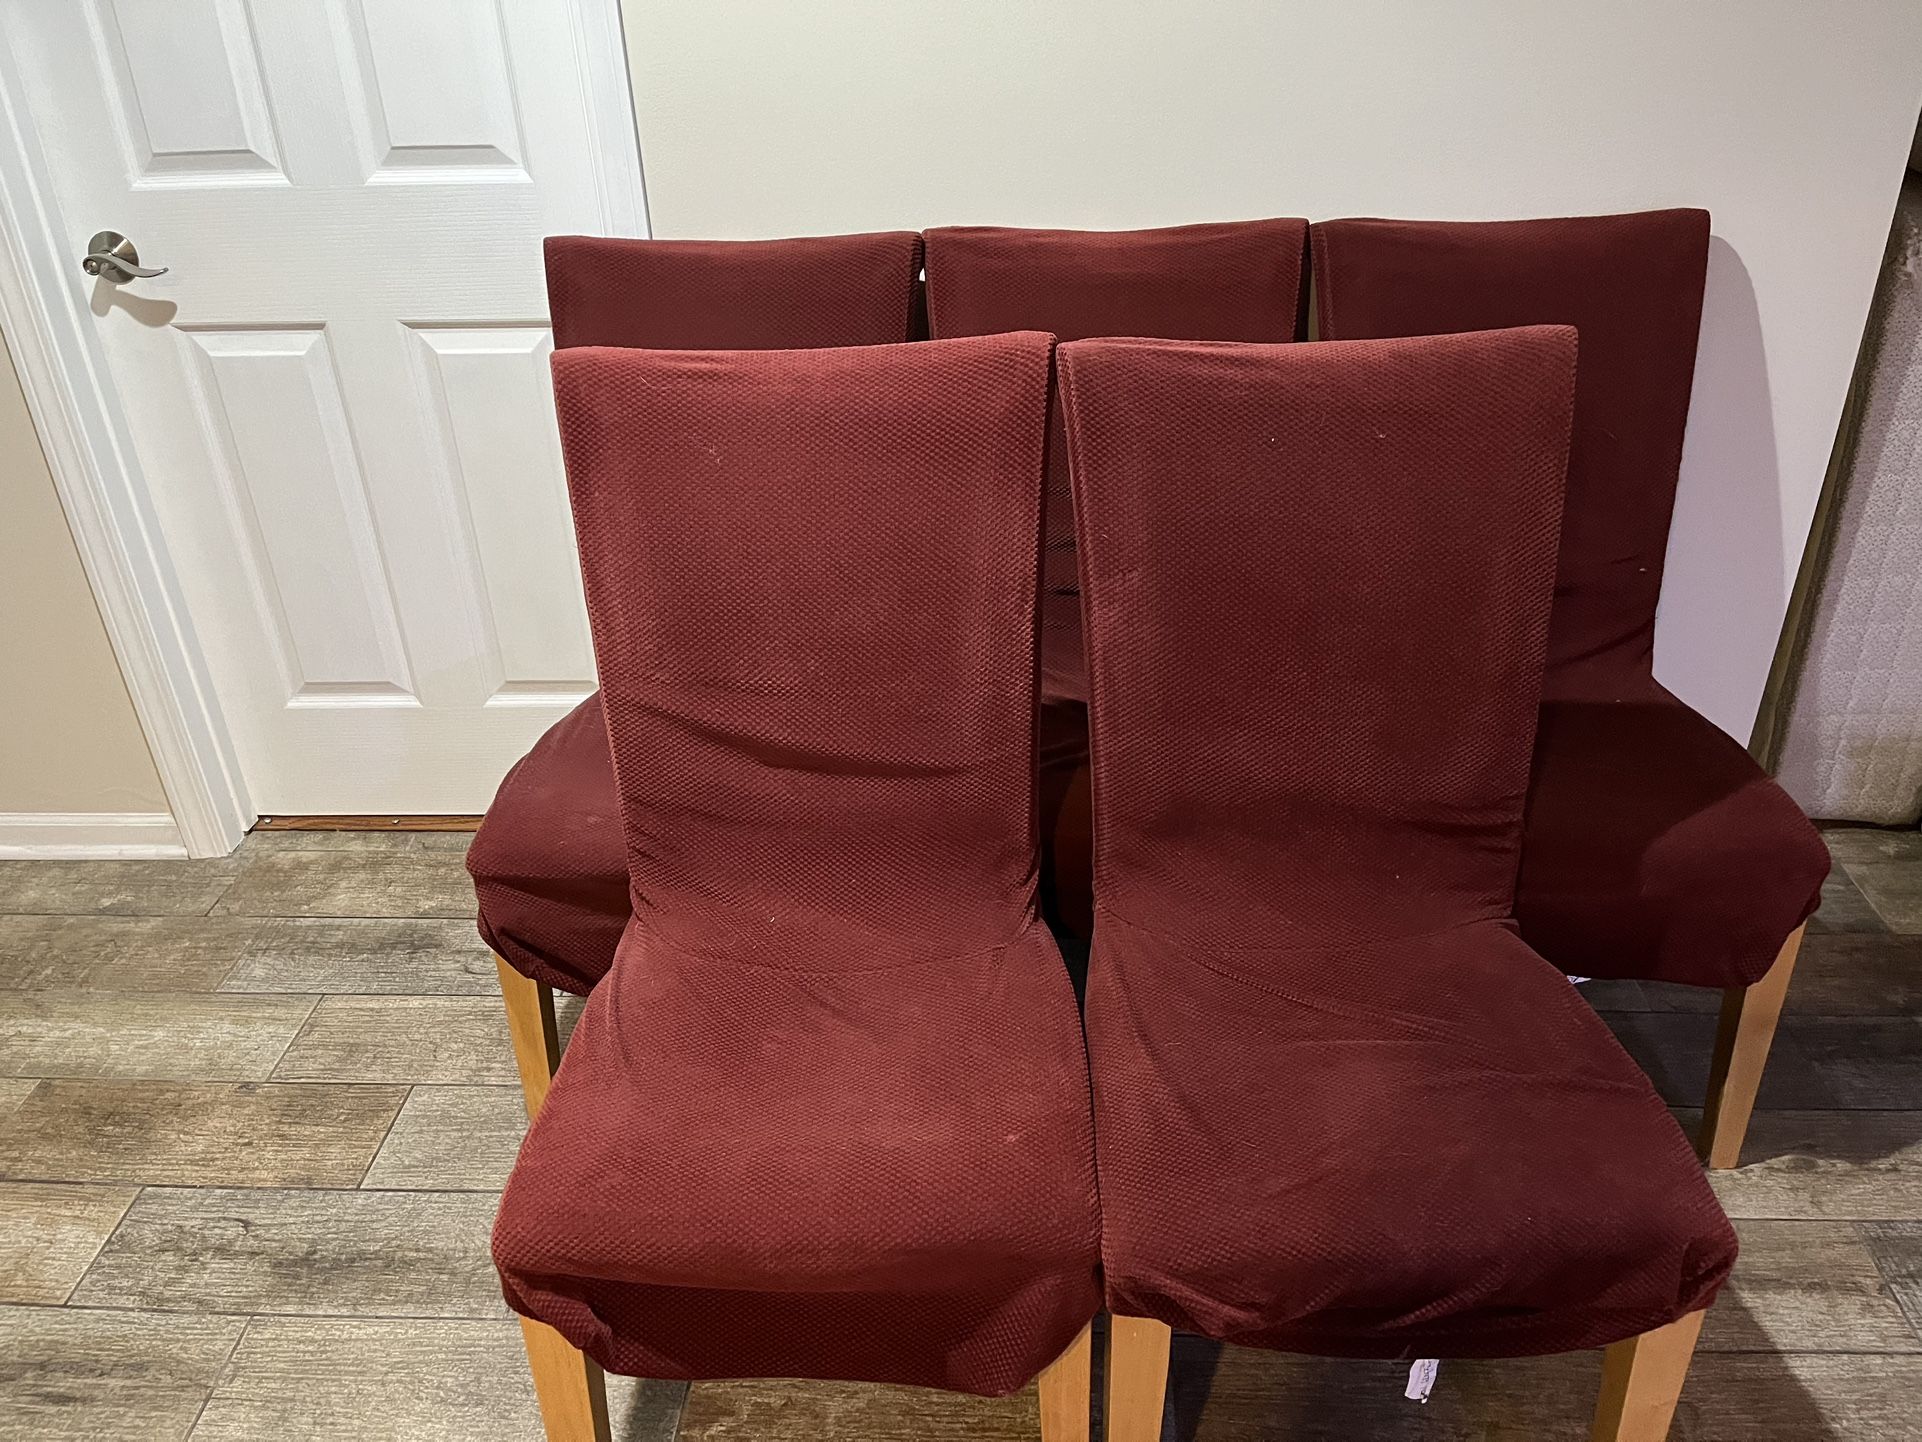 5 Chairs With Seat Covers